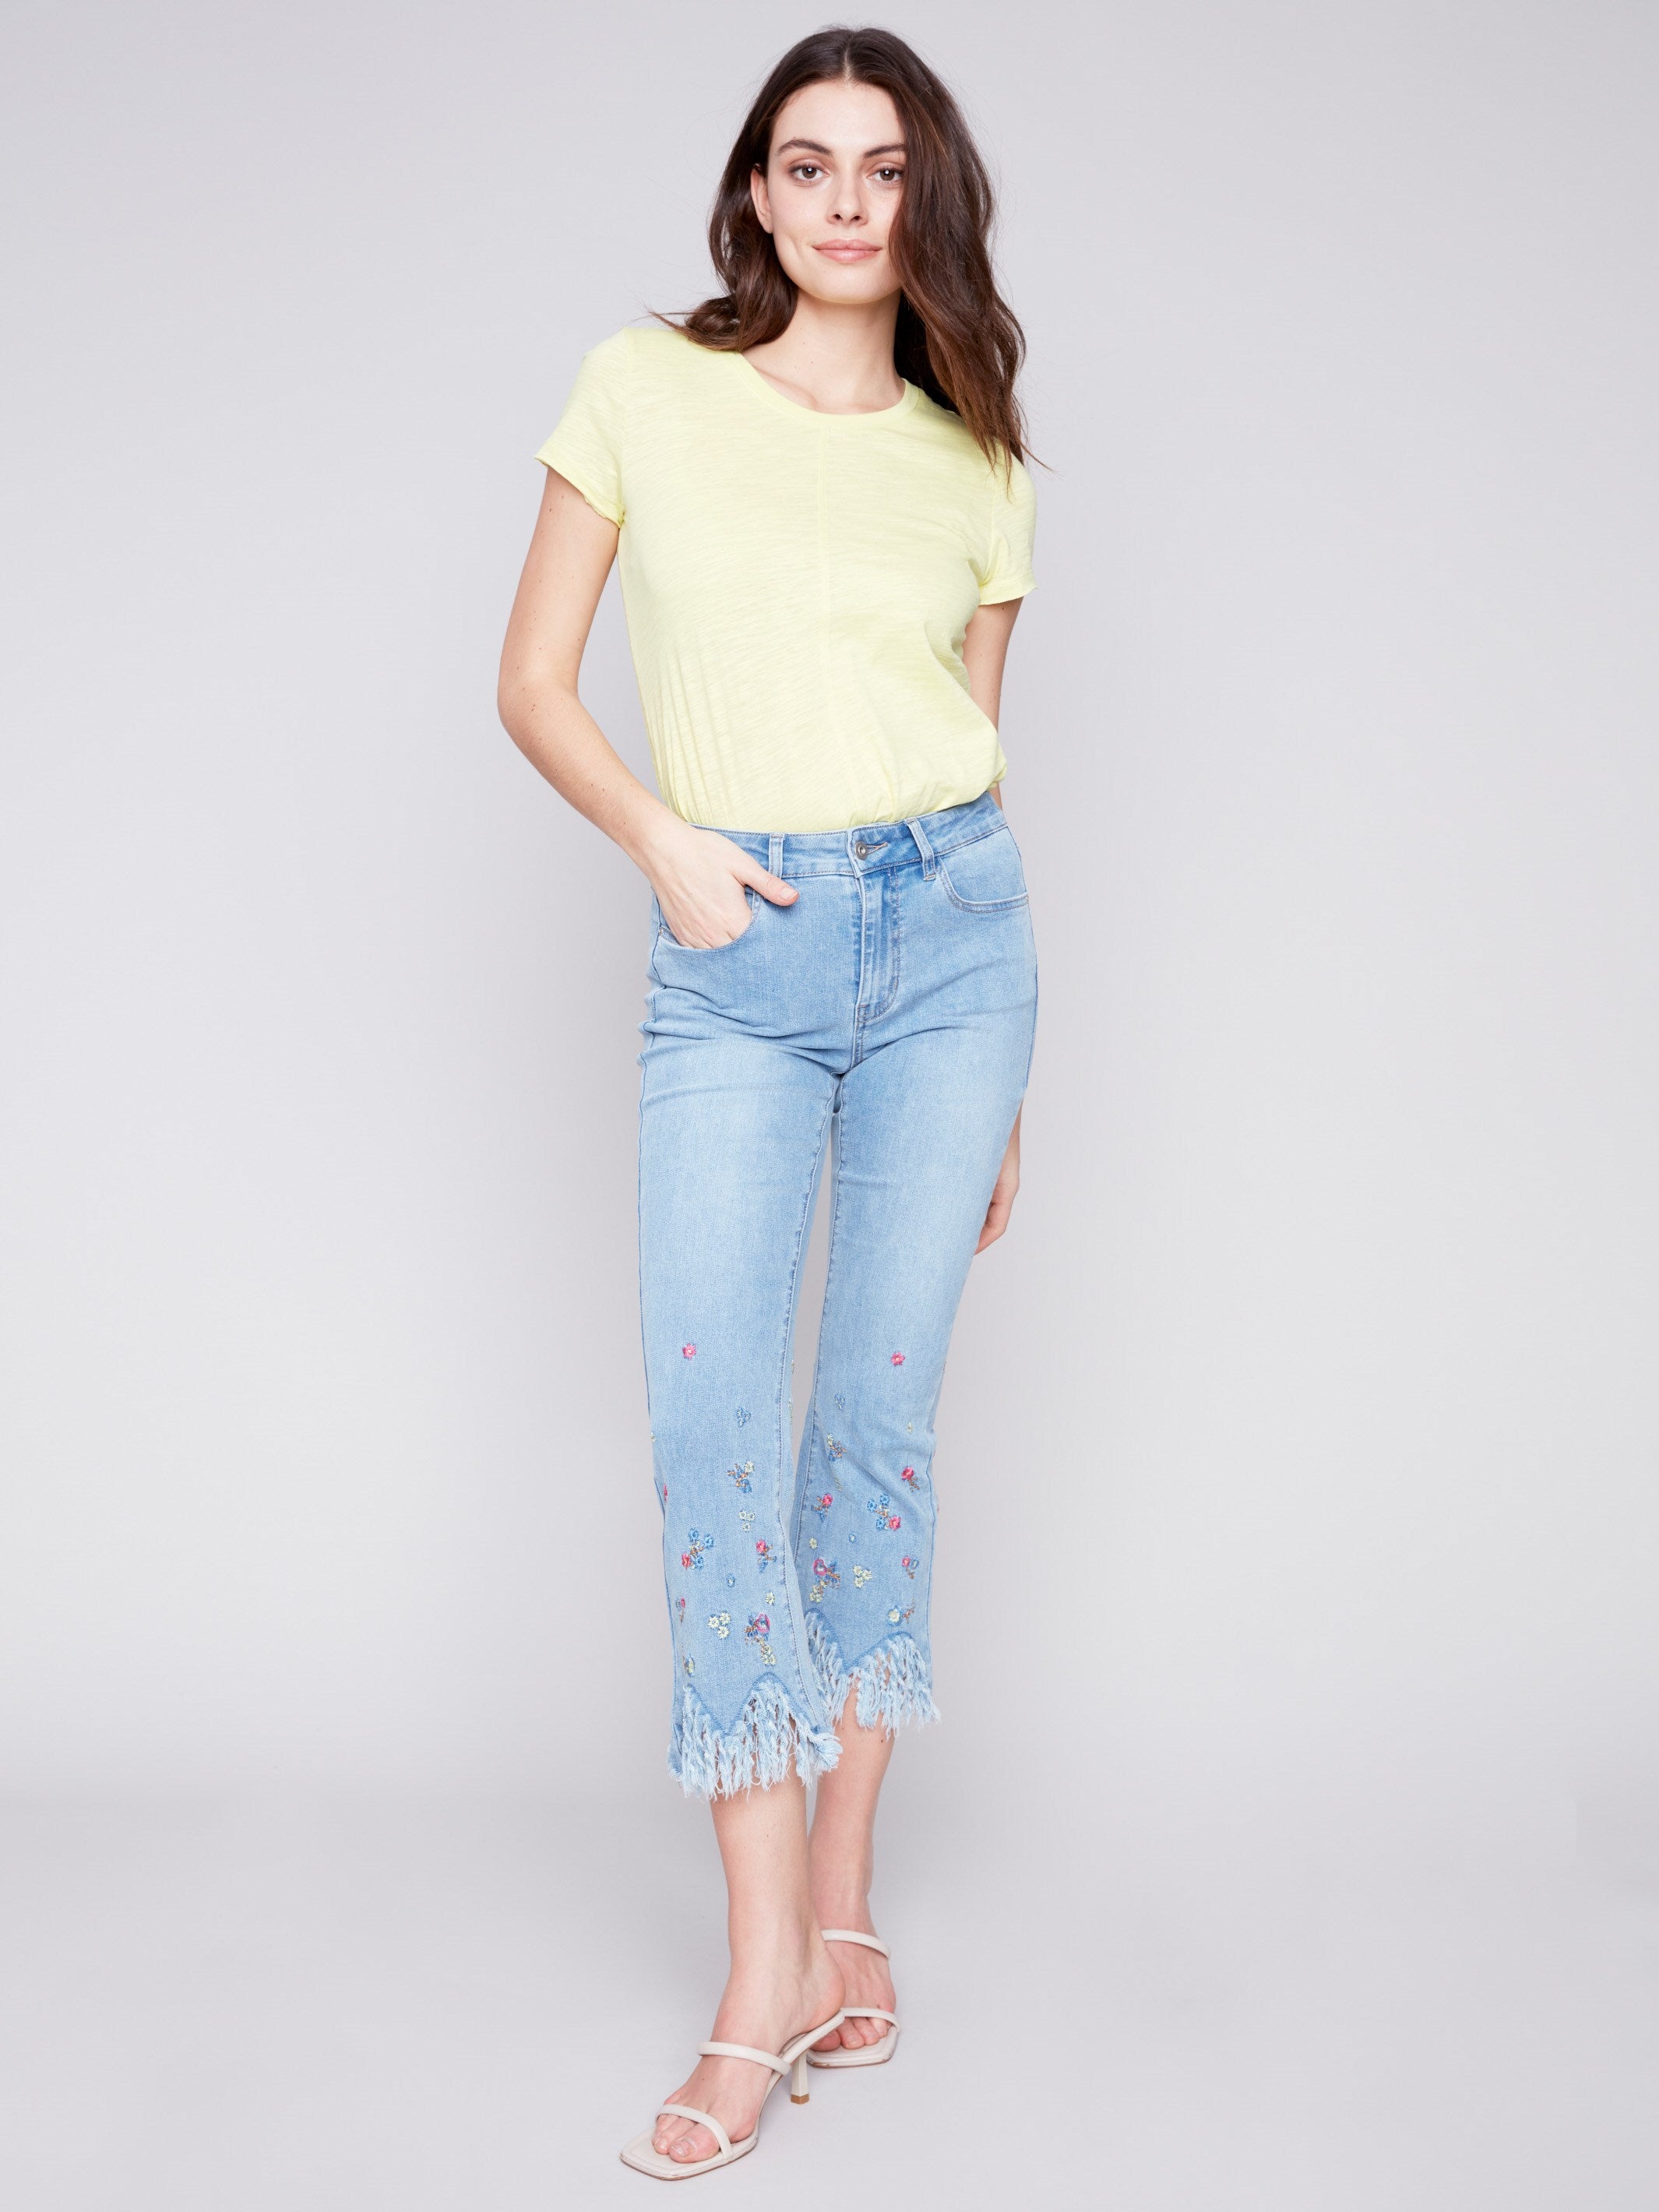 Charlie B Cropped Jeans with Embroidered Fringed Hem - Light Blue - Image 4